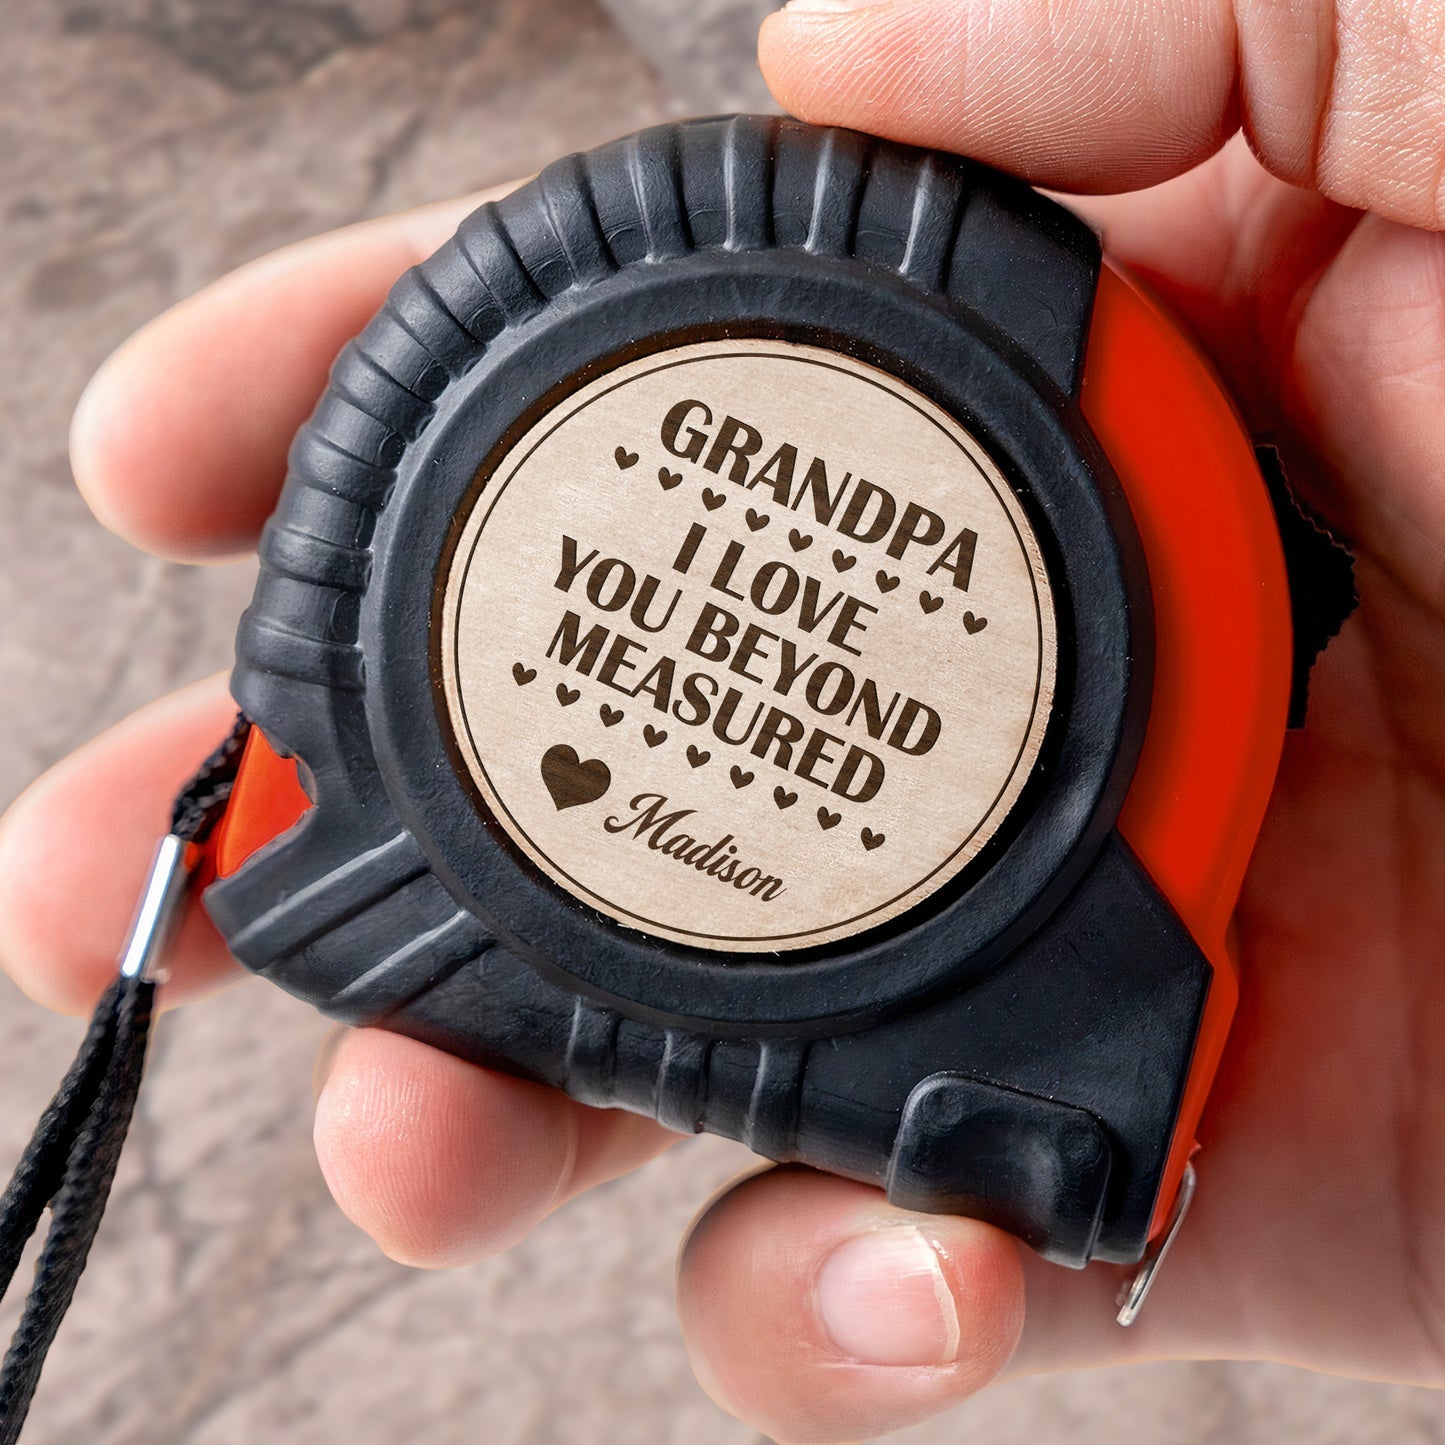 We Love You Beyond Measured - Personalized Tape Measure